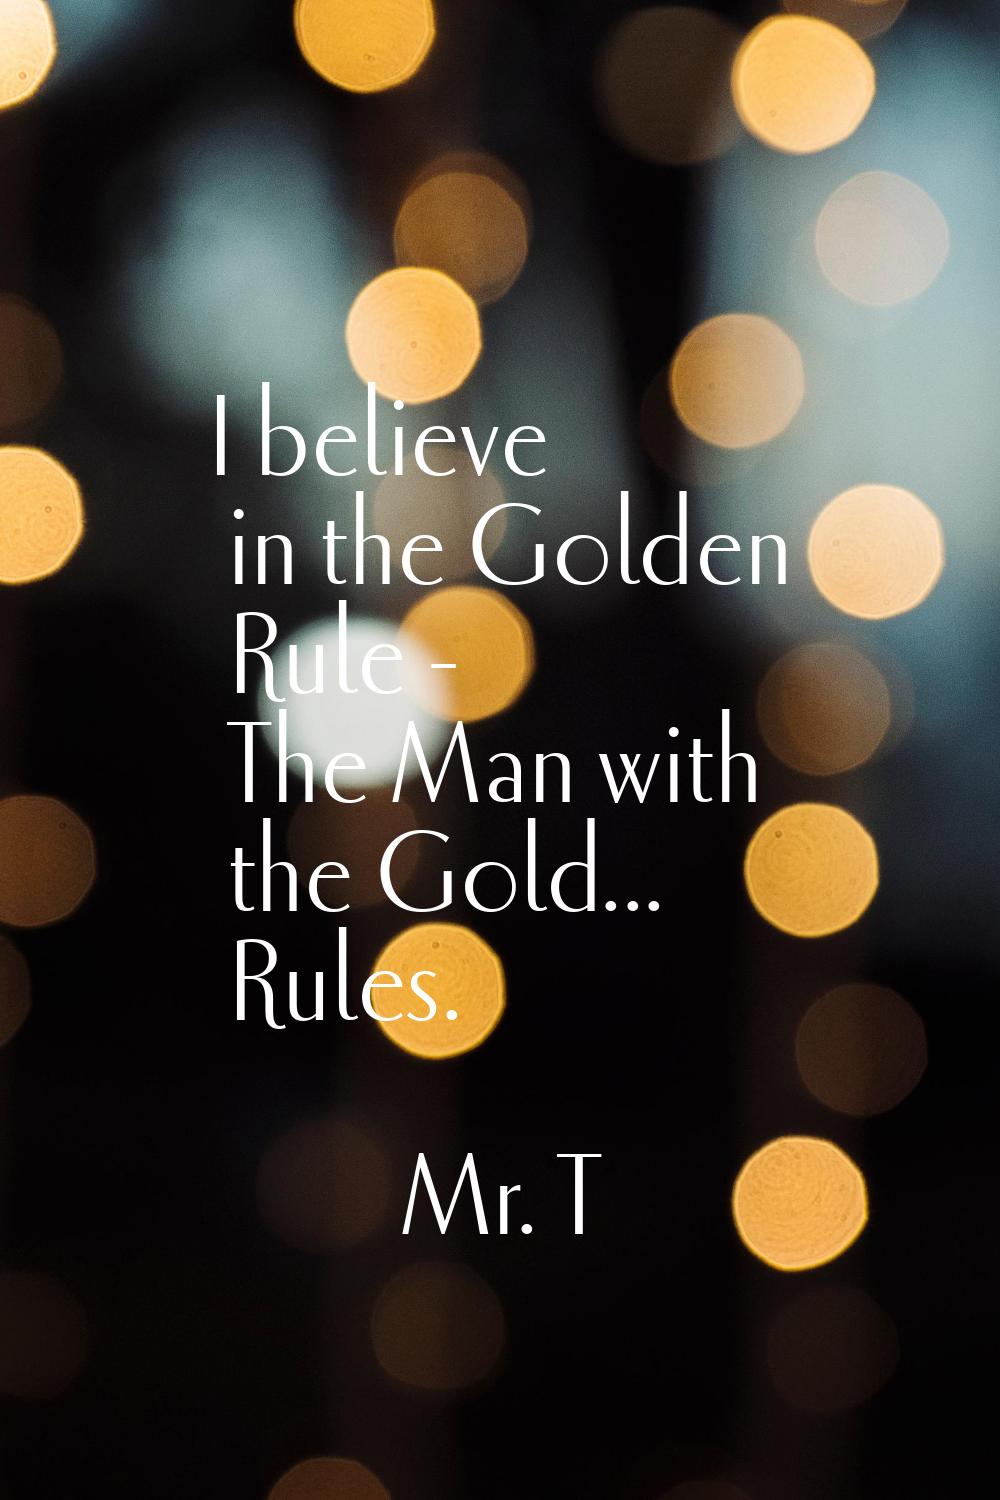 I believe in the Golden Rule - The Man with the Gold... Rules.